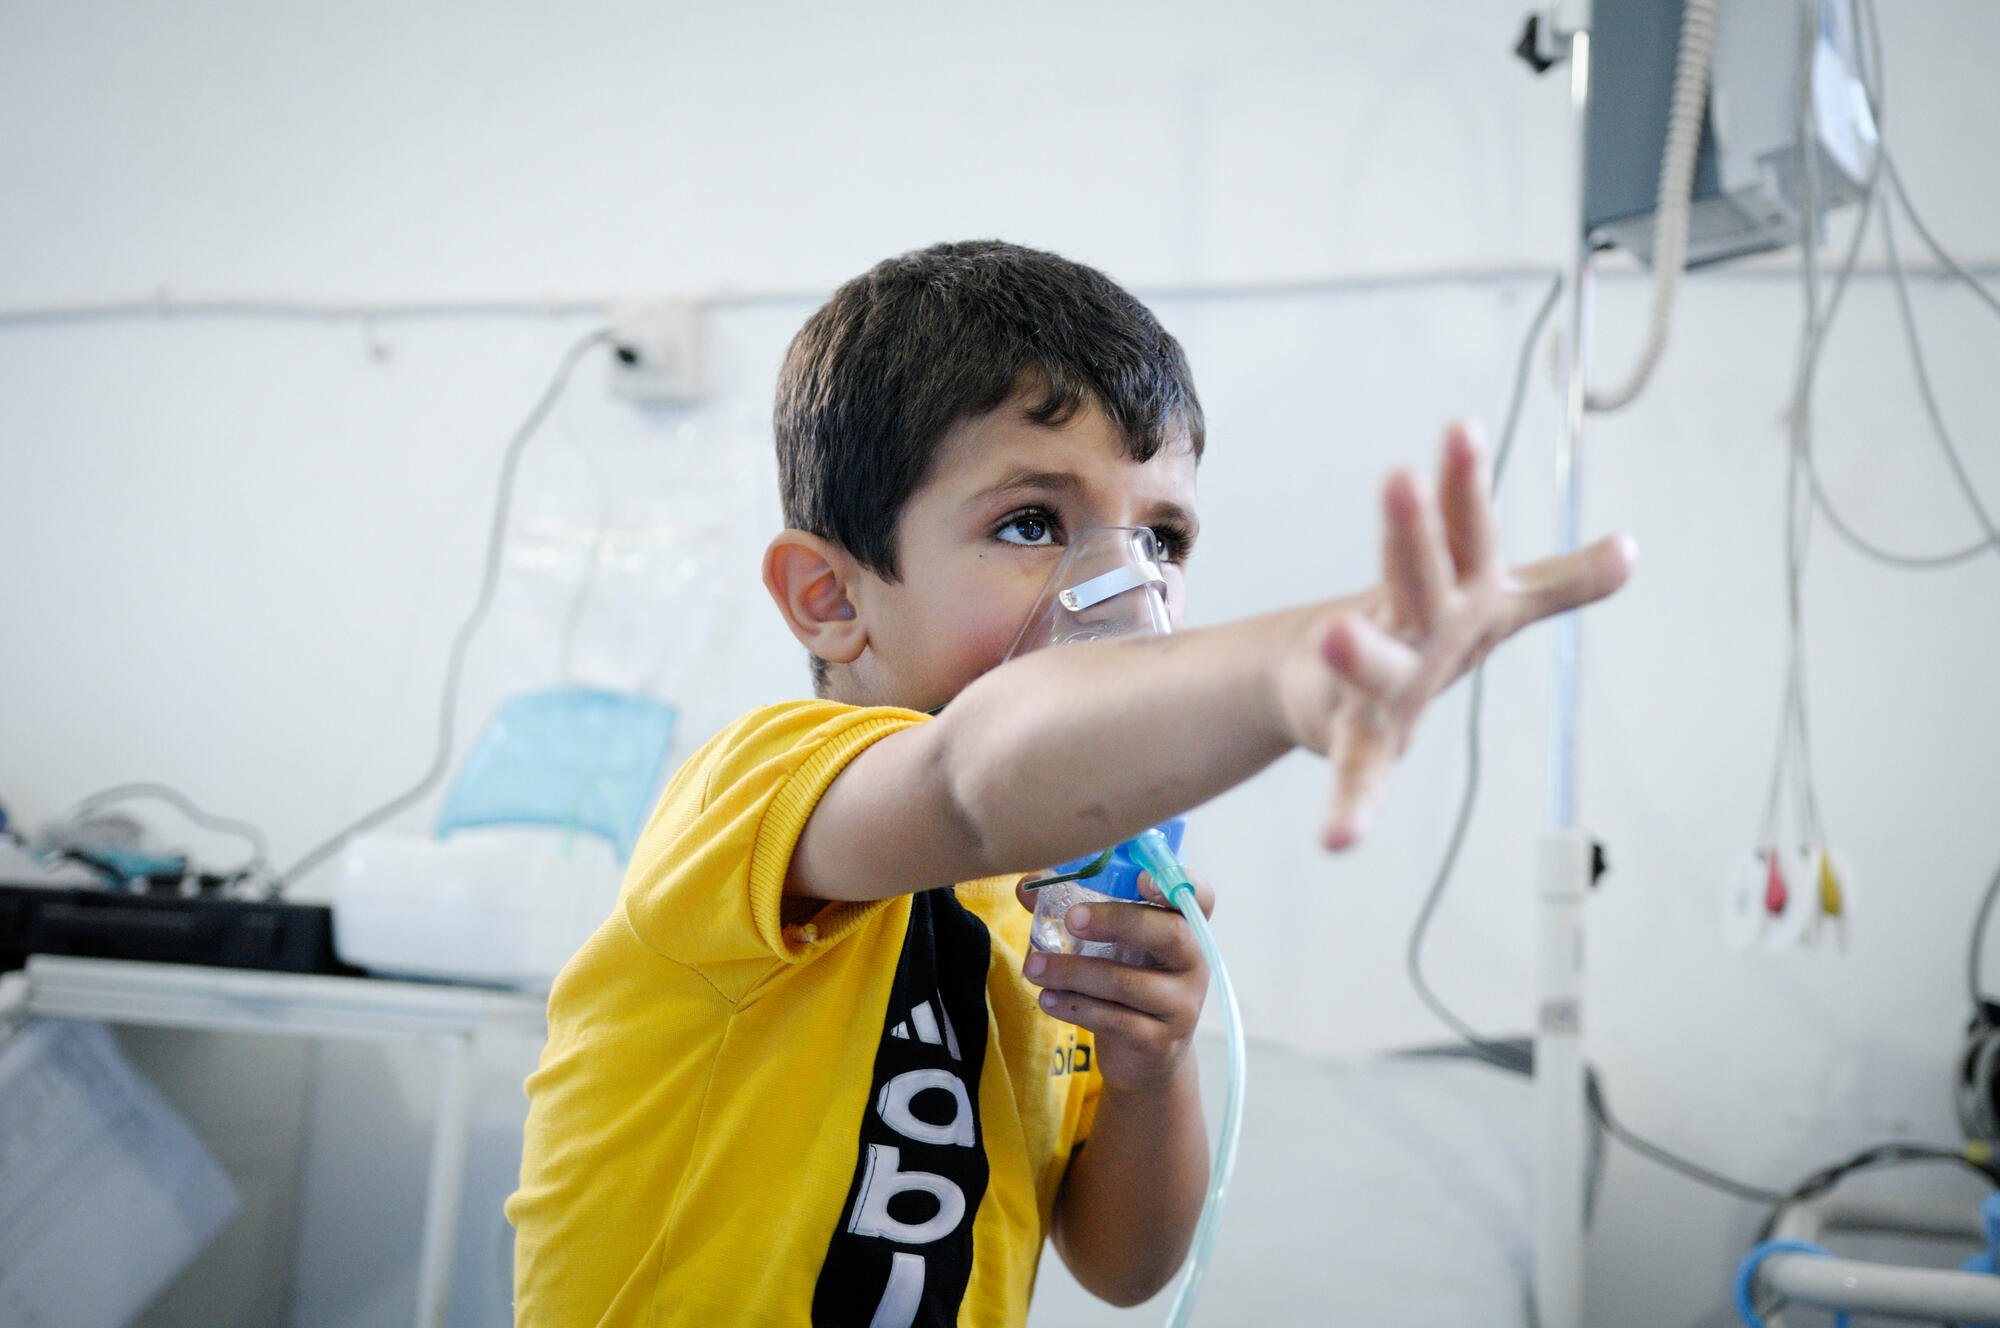 July 2013. A boy with asthma receiving oxygen in the ER section of an MSF hospital in Syria. The dust had aggravated his asthma and he arrived at the MSF hospital unable to breathe. It was impossible for his parents to find an asthma inhaler in Syria. ©Robin Meldrum/MSF